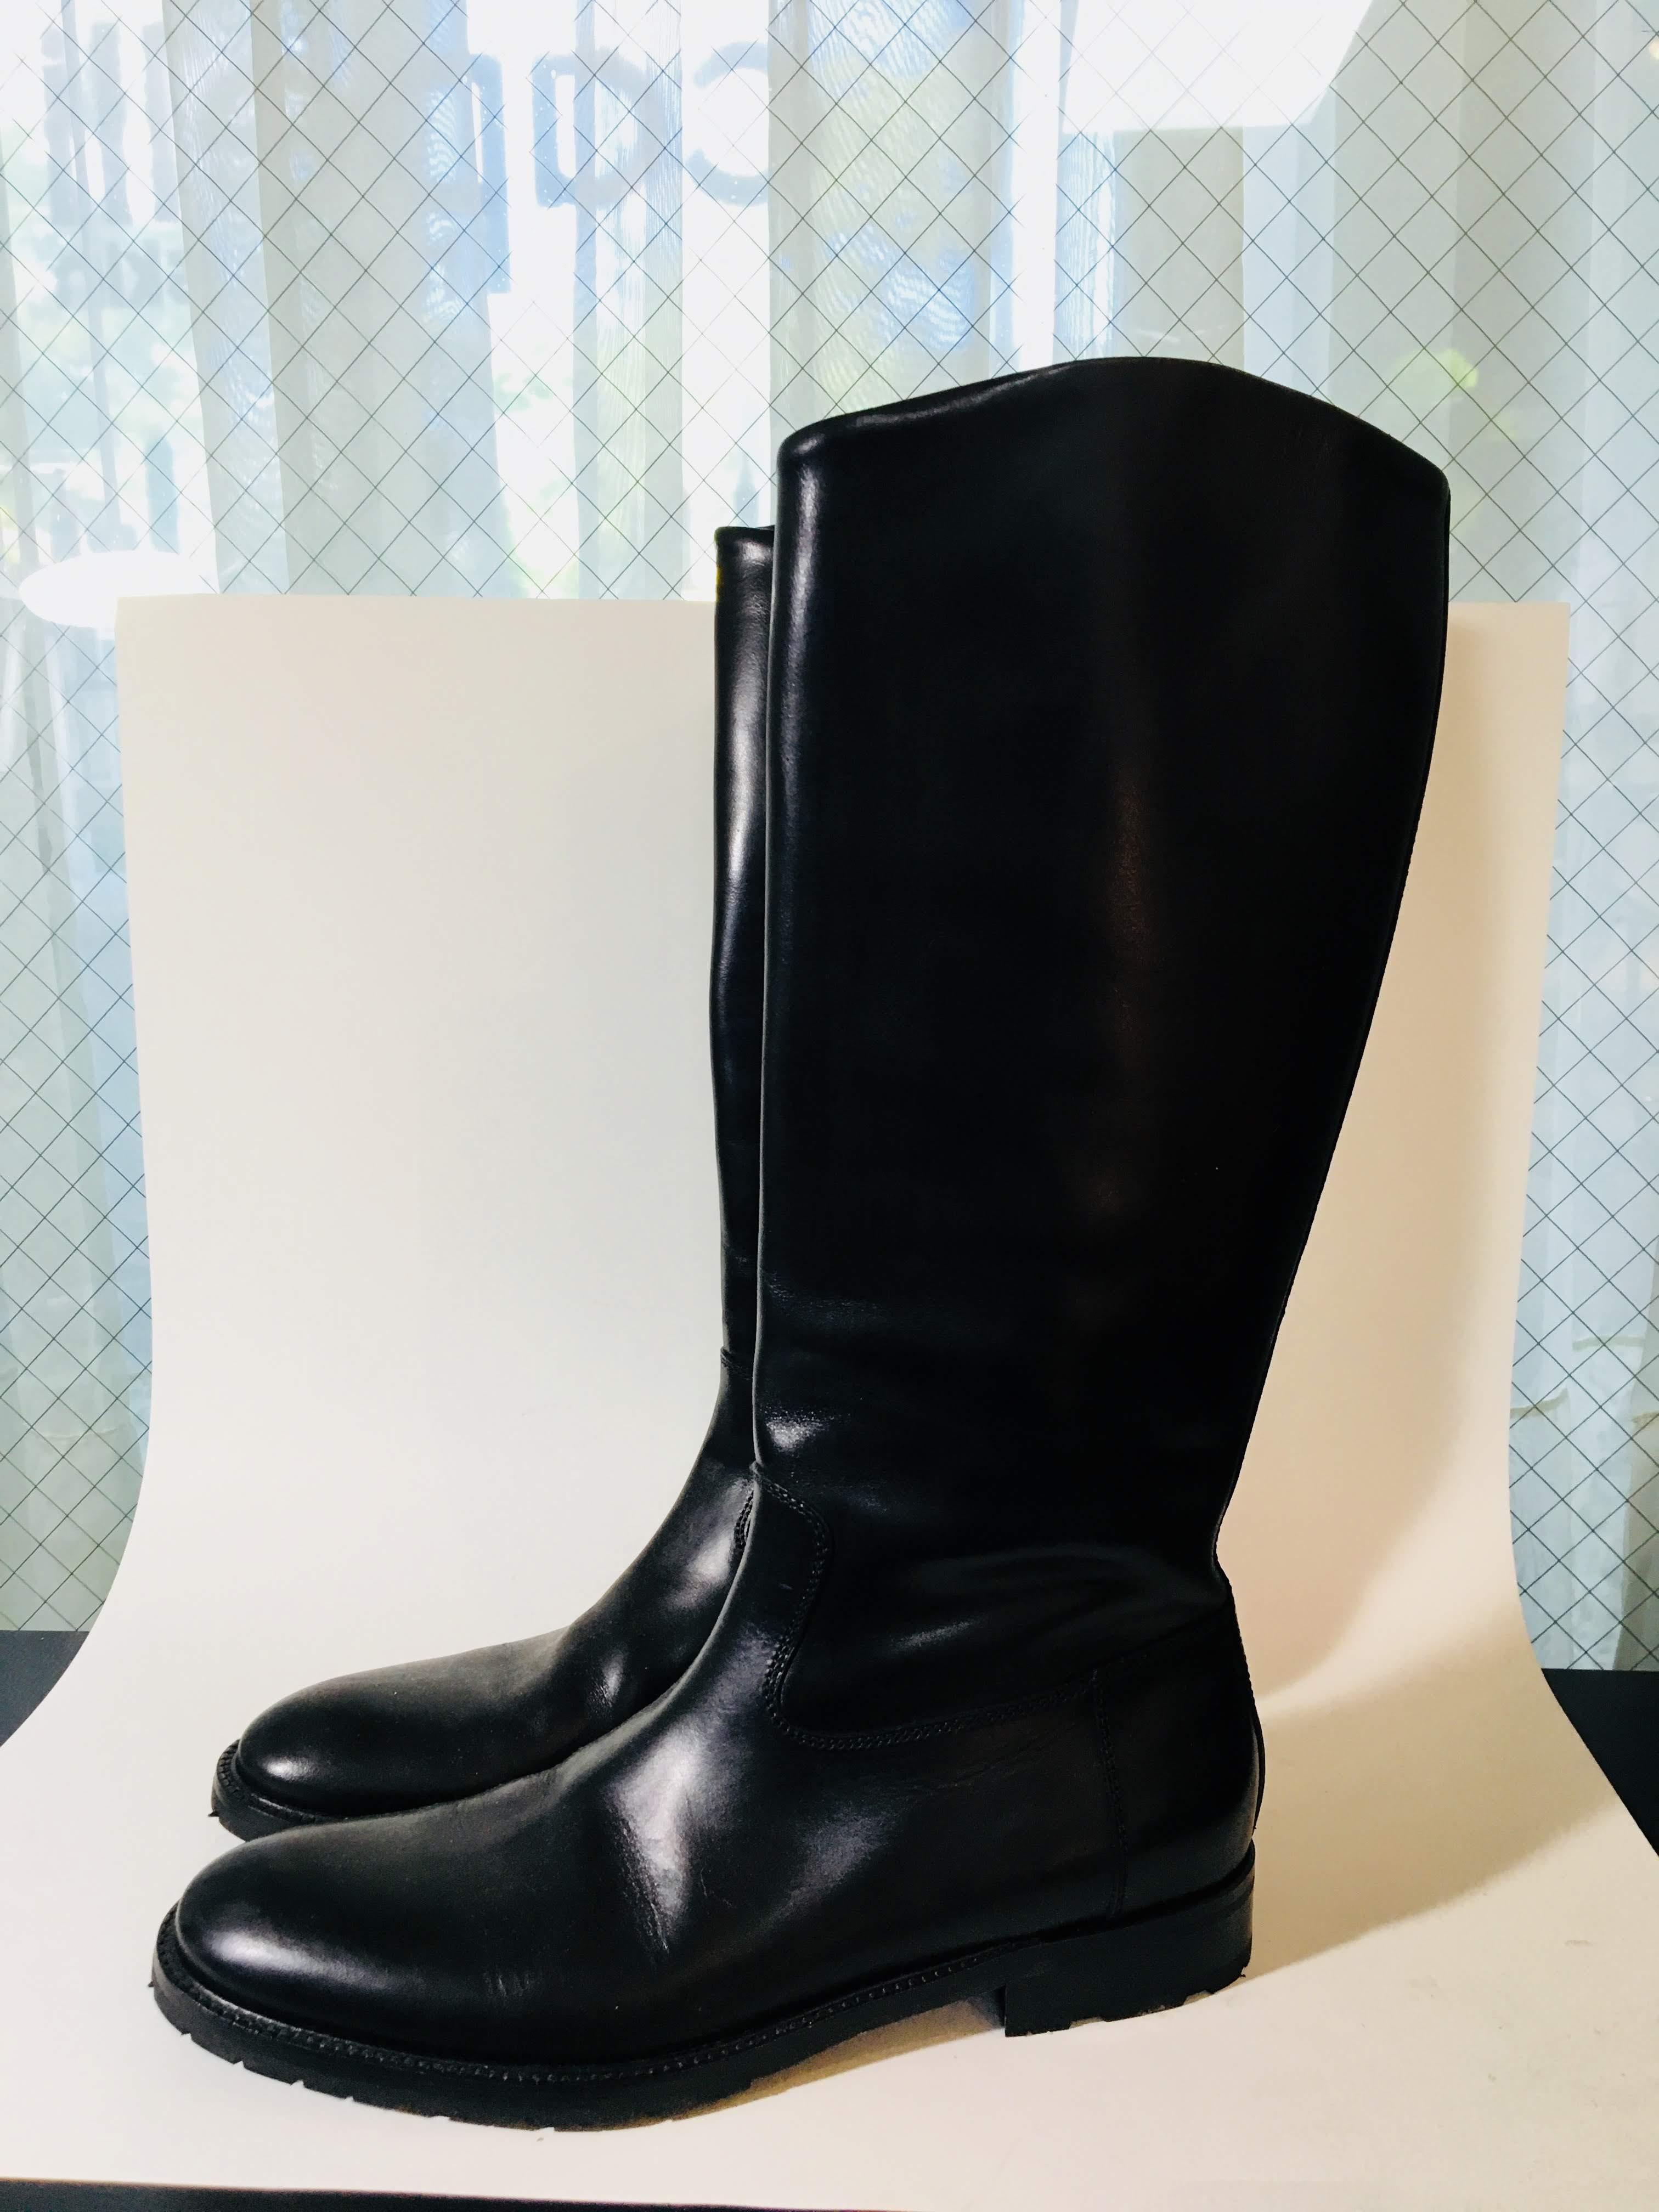 dolce and gabbana boots mens